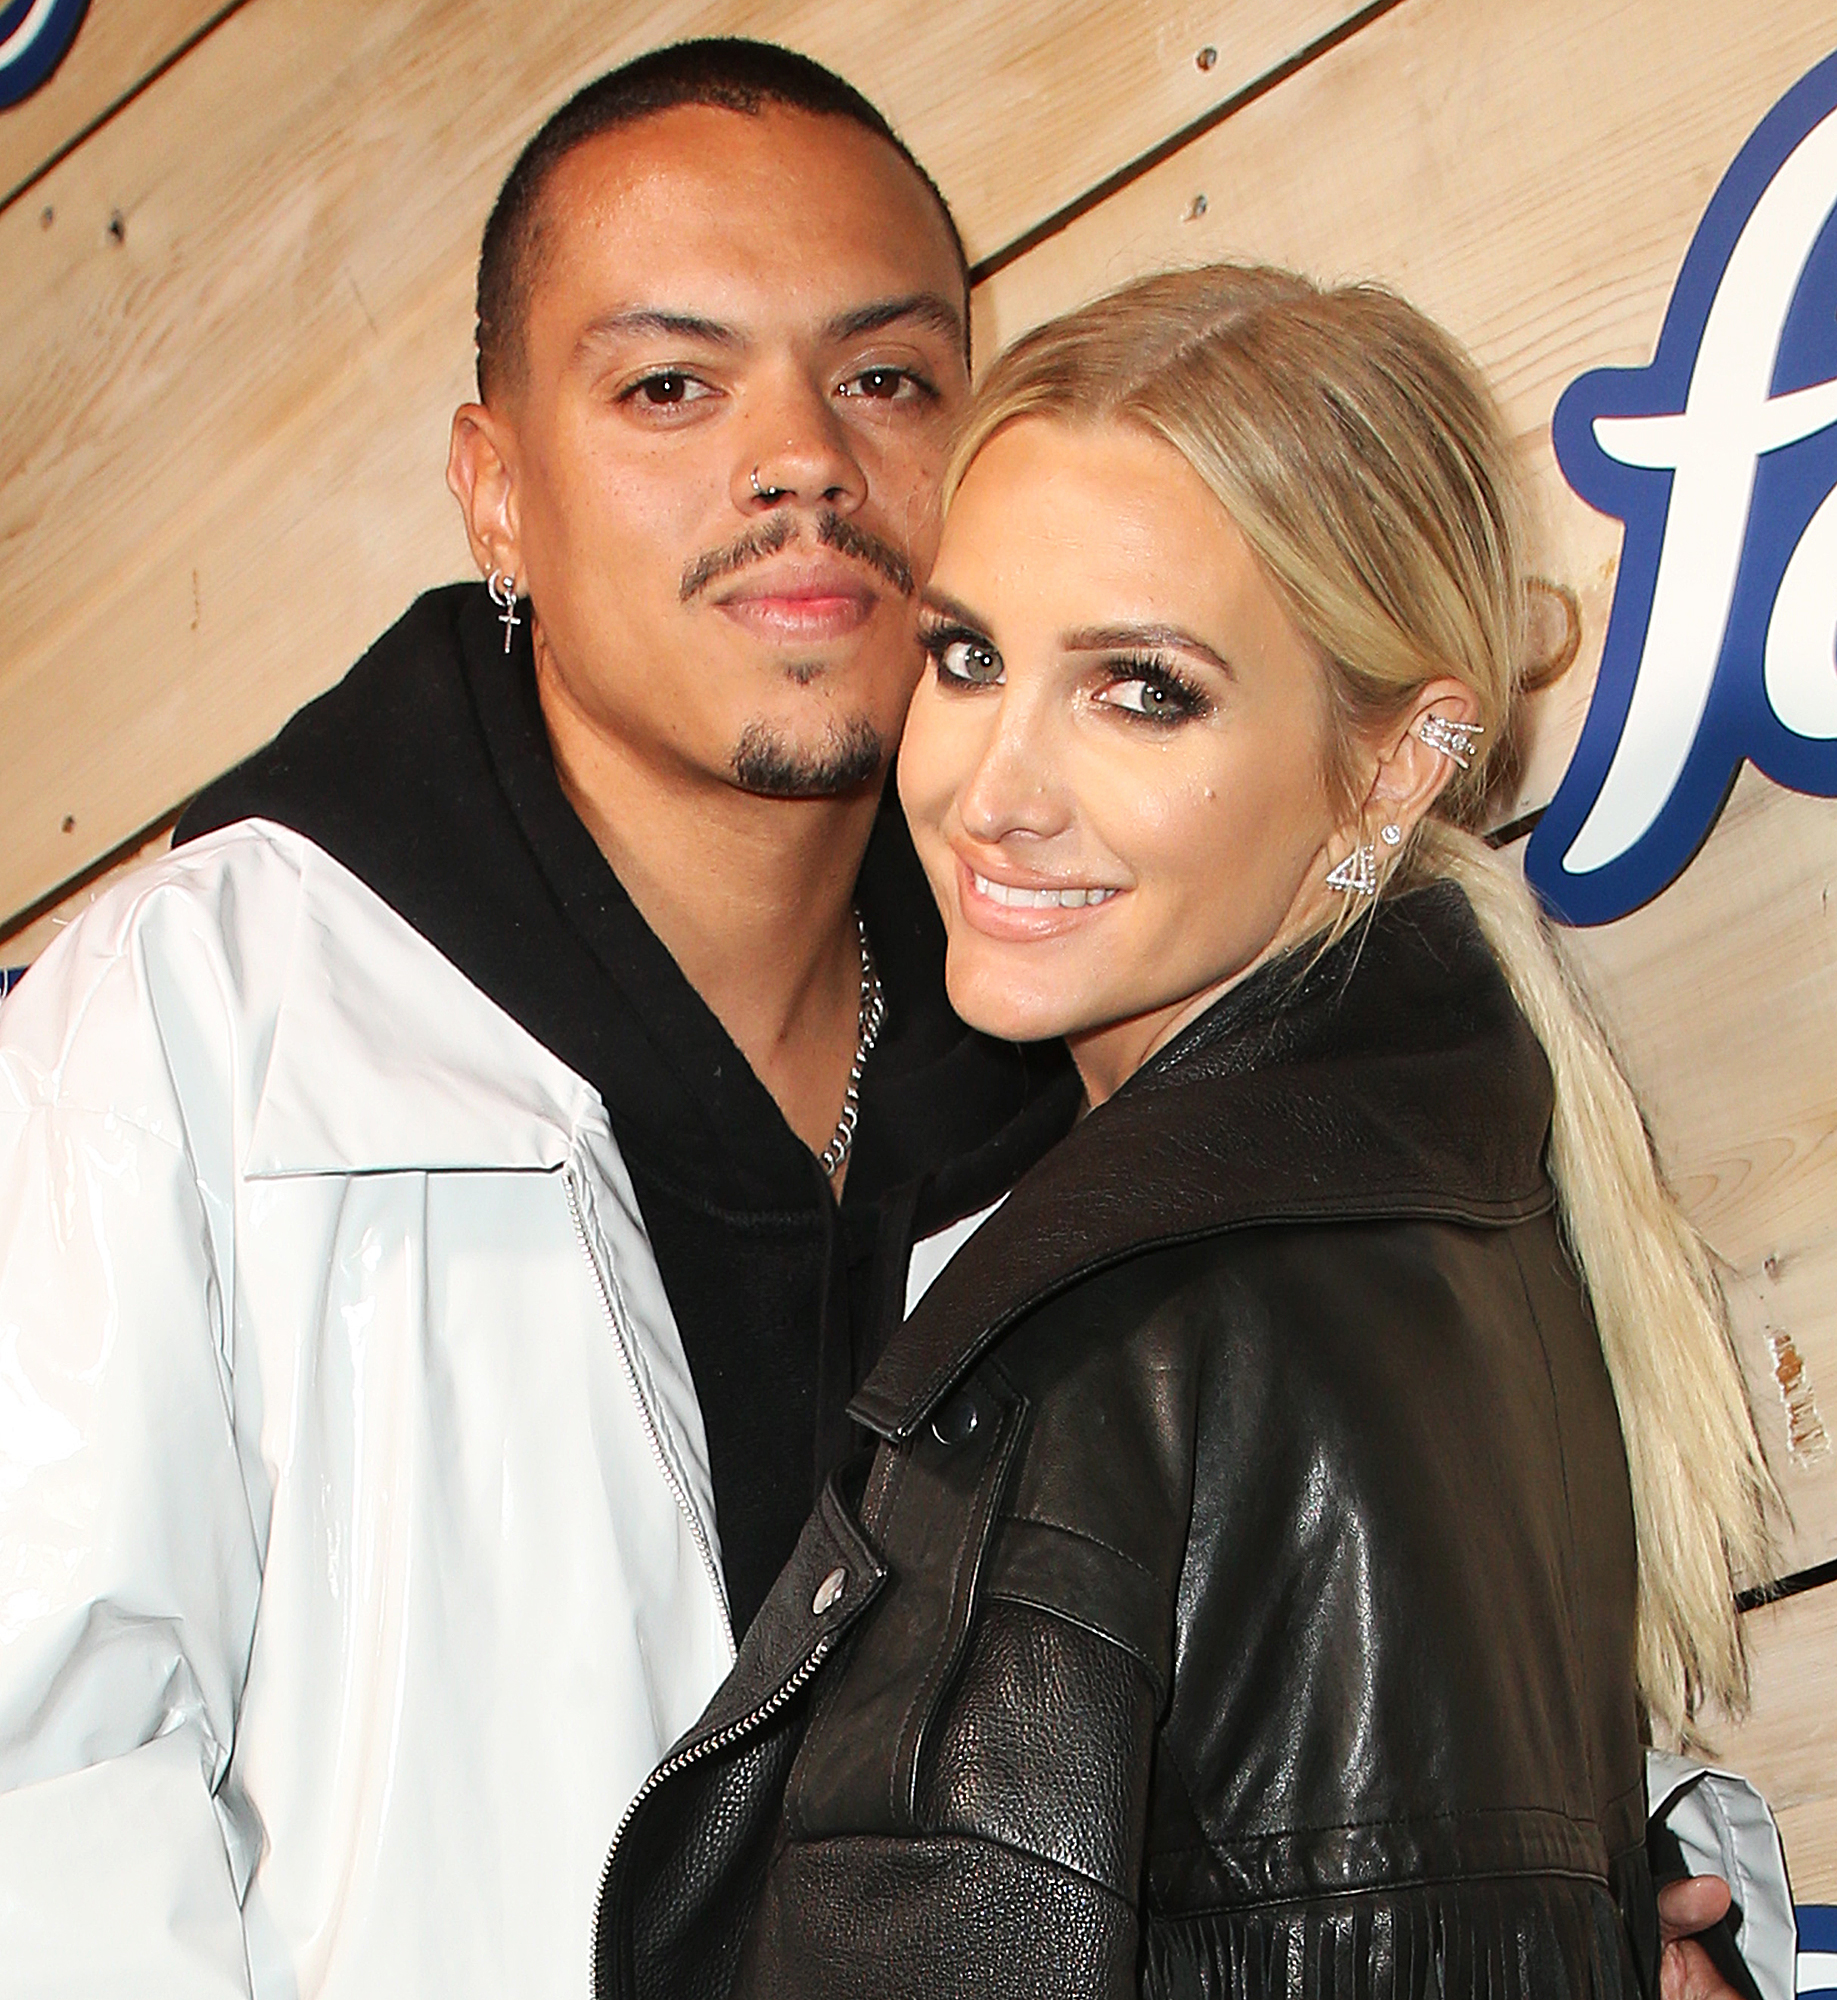 Hot Ashlee Simpson Porn - Ashlee Simpson Gives Birth to 3rd Child, 2nd With Husband Evan Ross